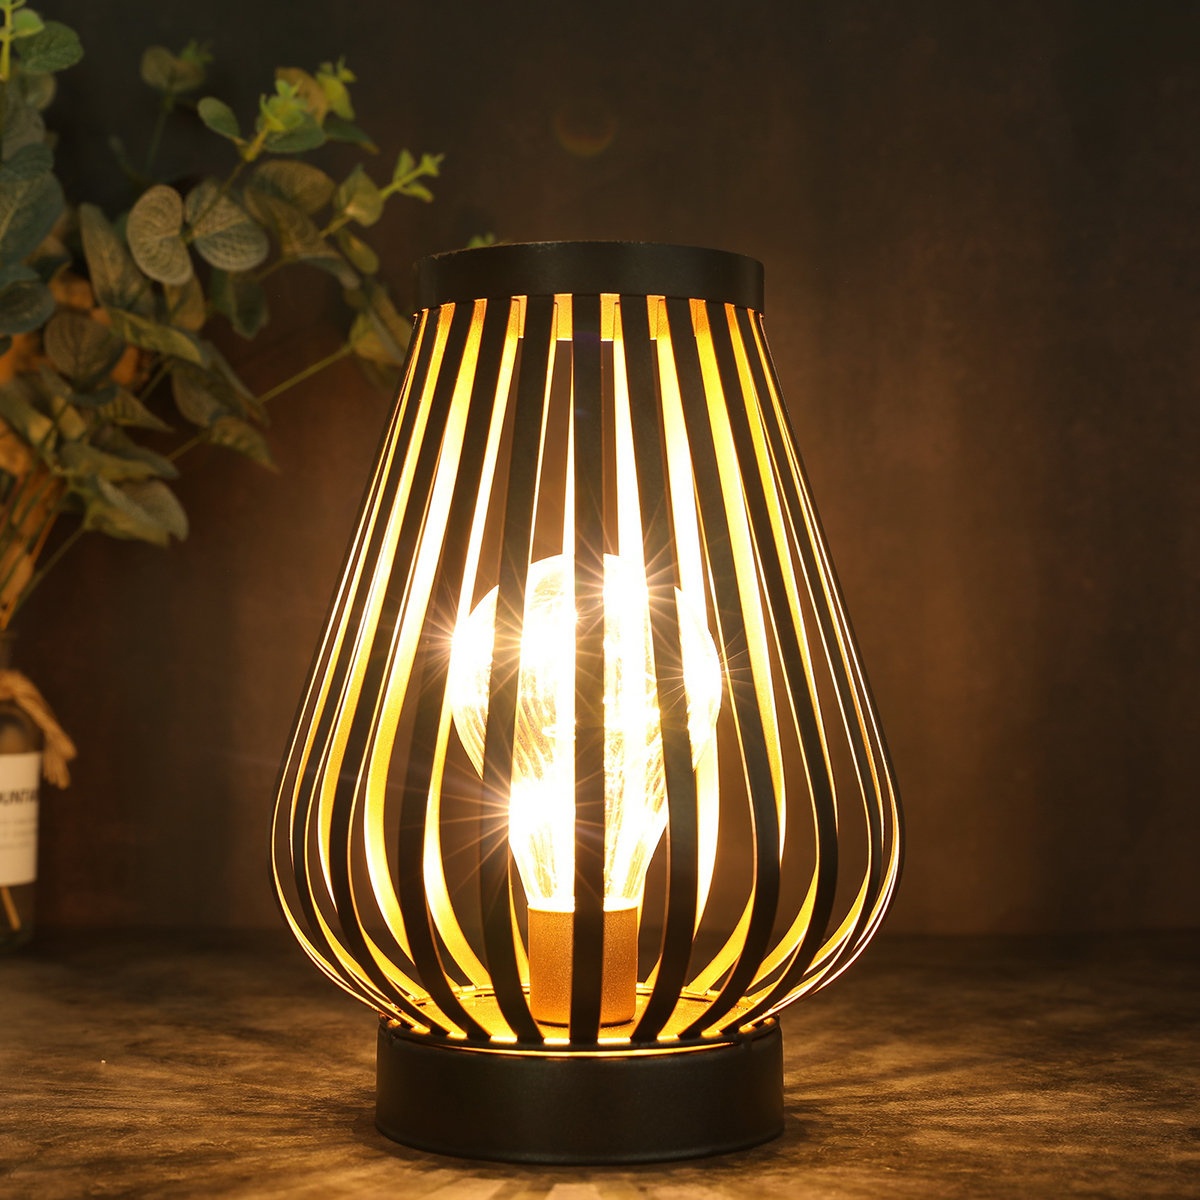 https://visualhunt.com/photos/23/8-7-battery-powered-outdoor-table-lamp.jpg